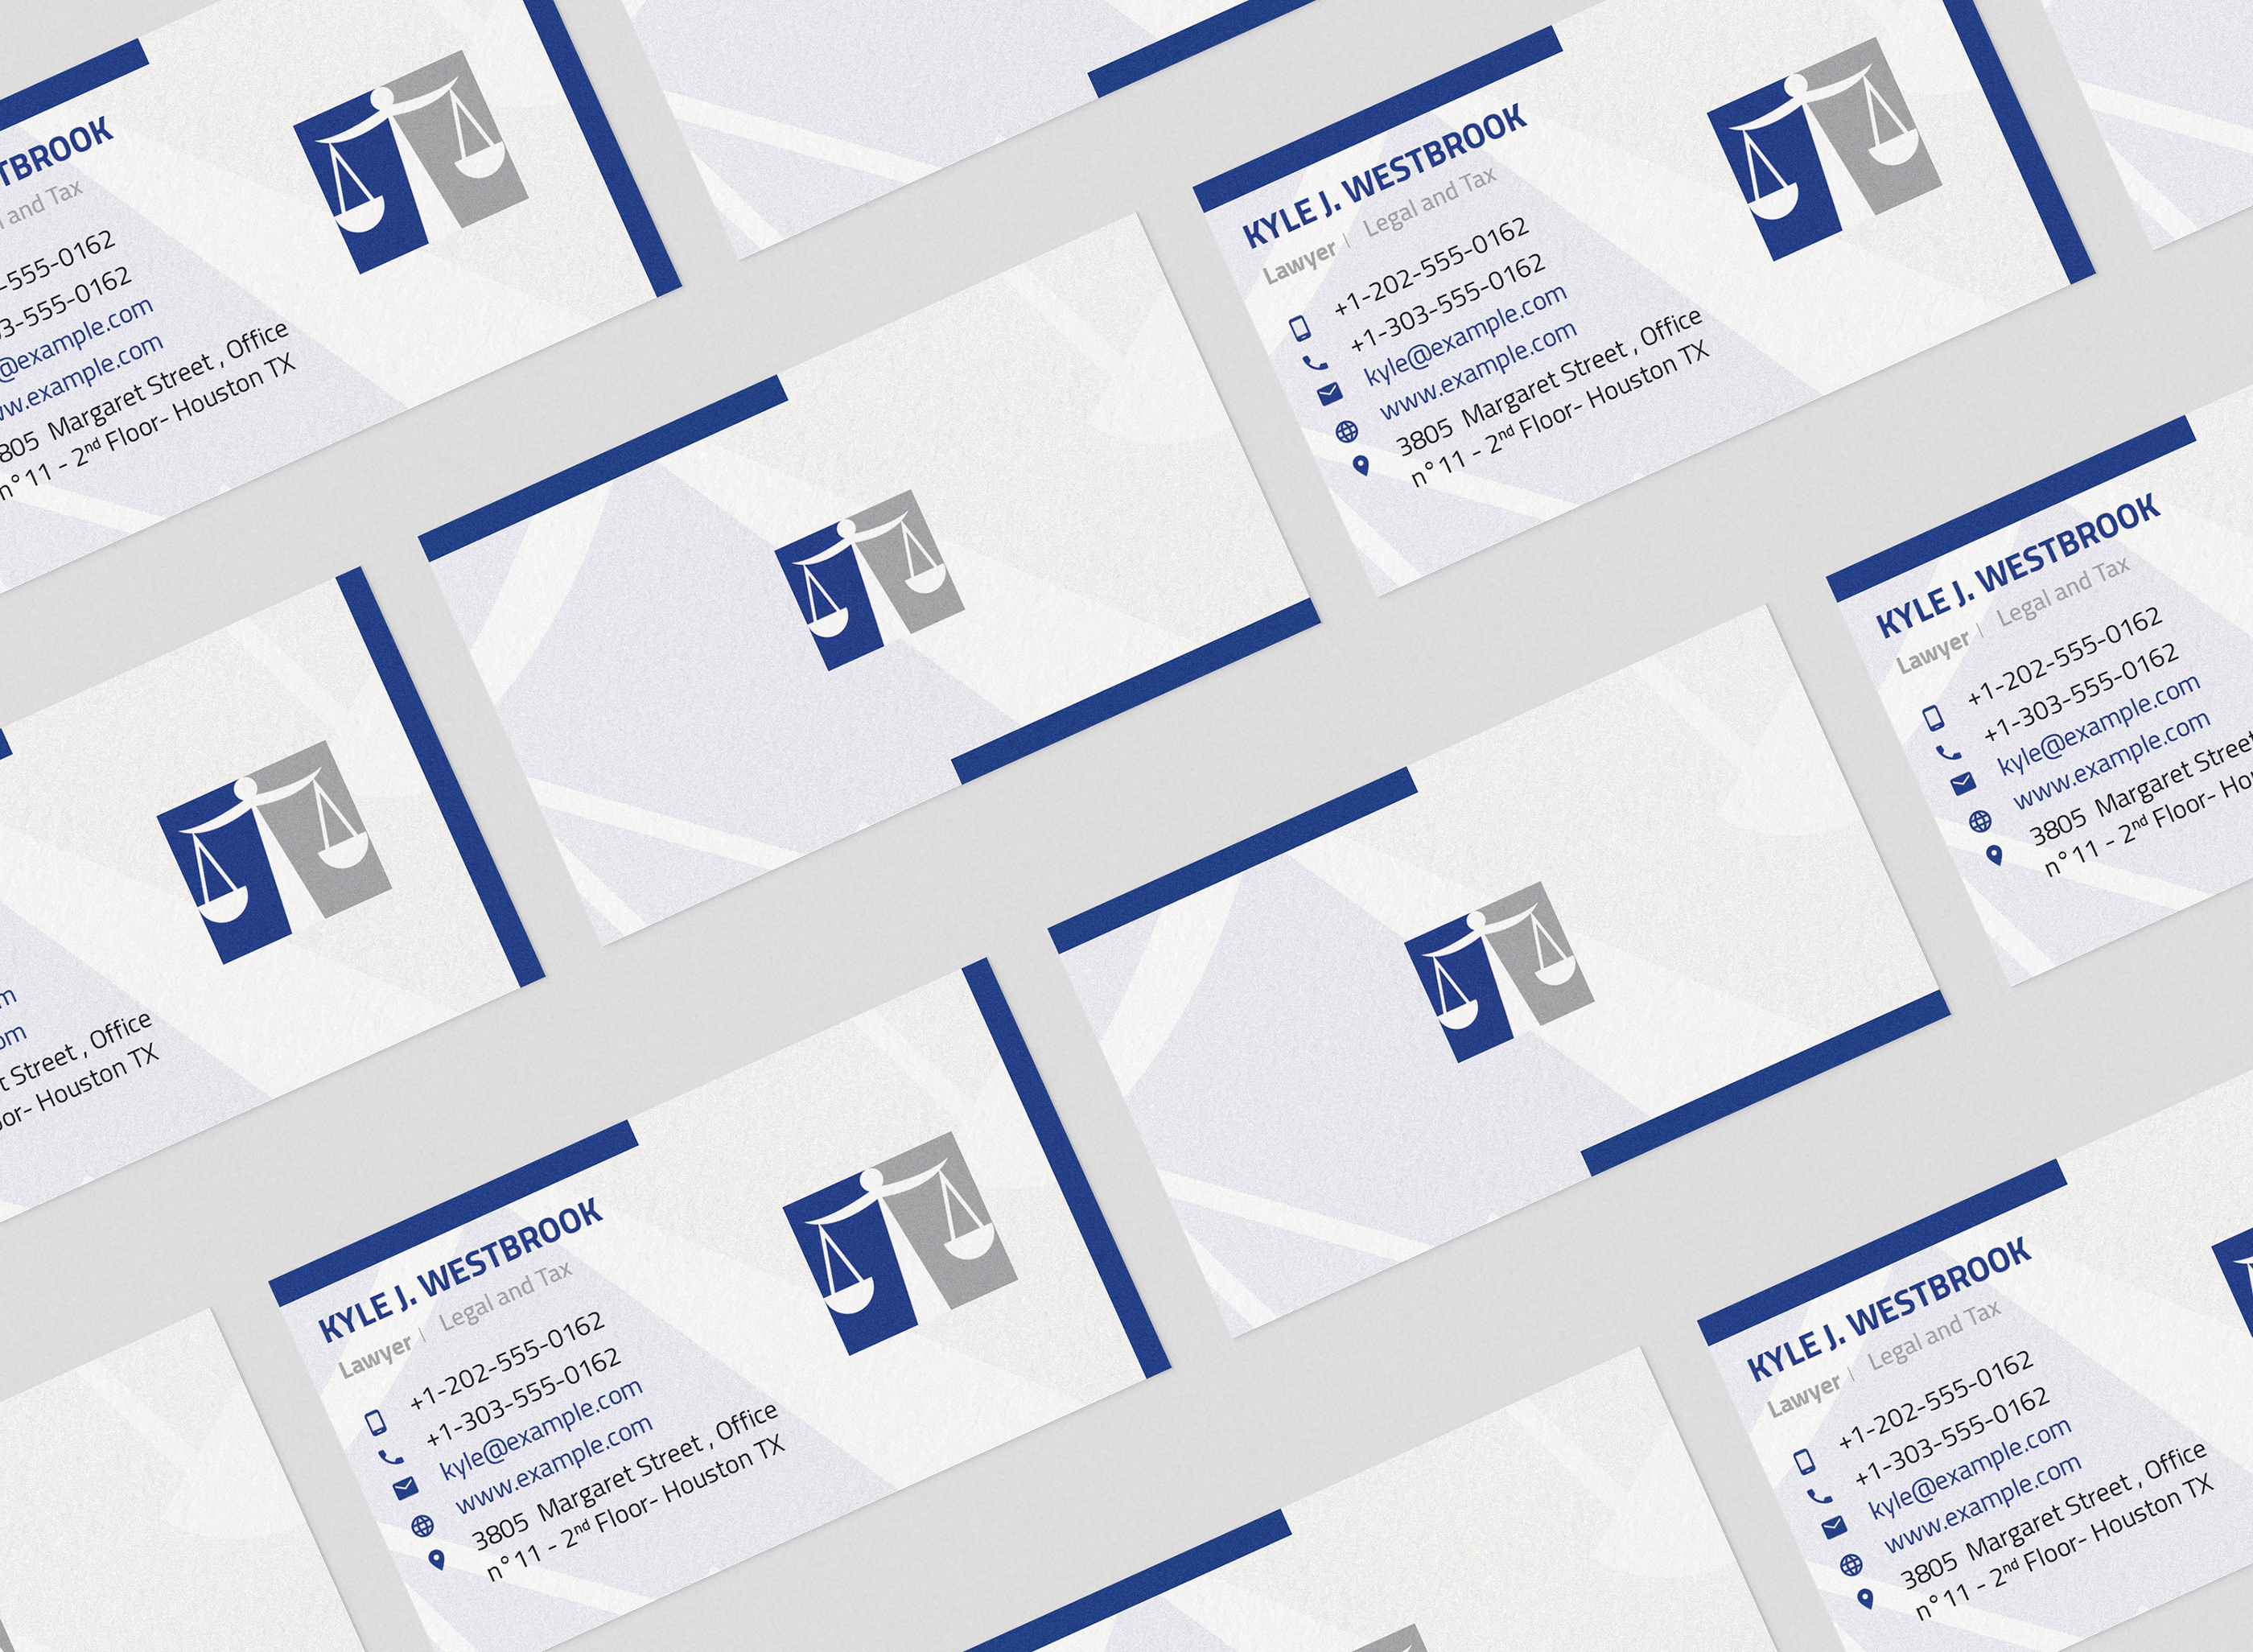 Download Free Lawyer Law Firm Clean Business Card On Behance PSD Mockups.